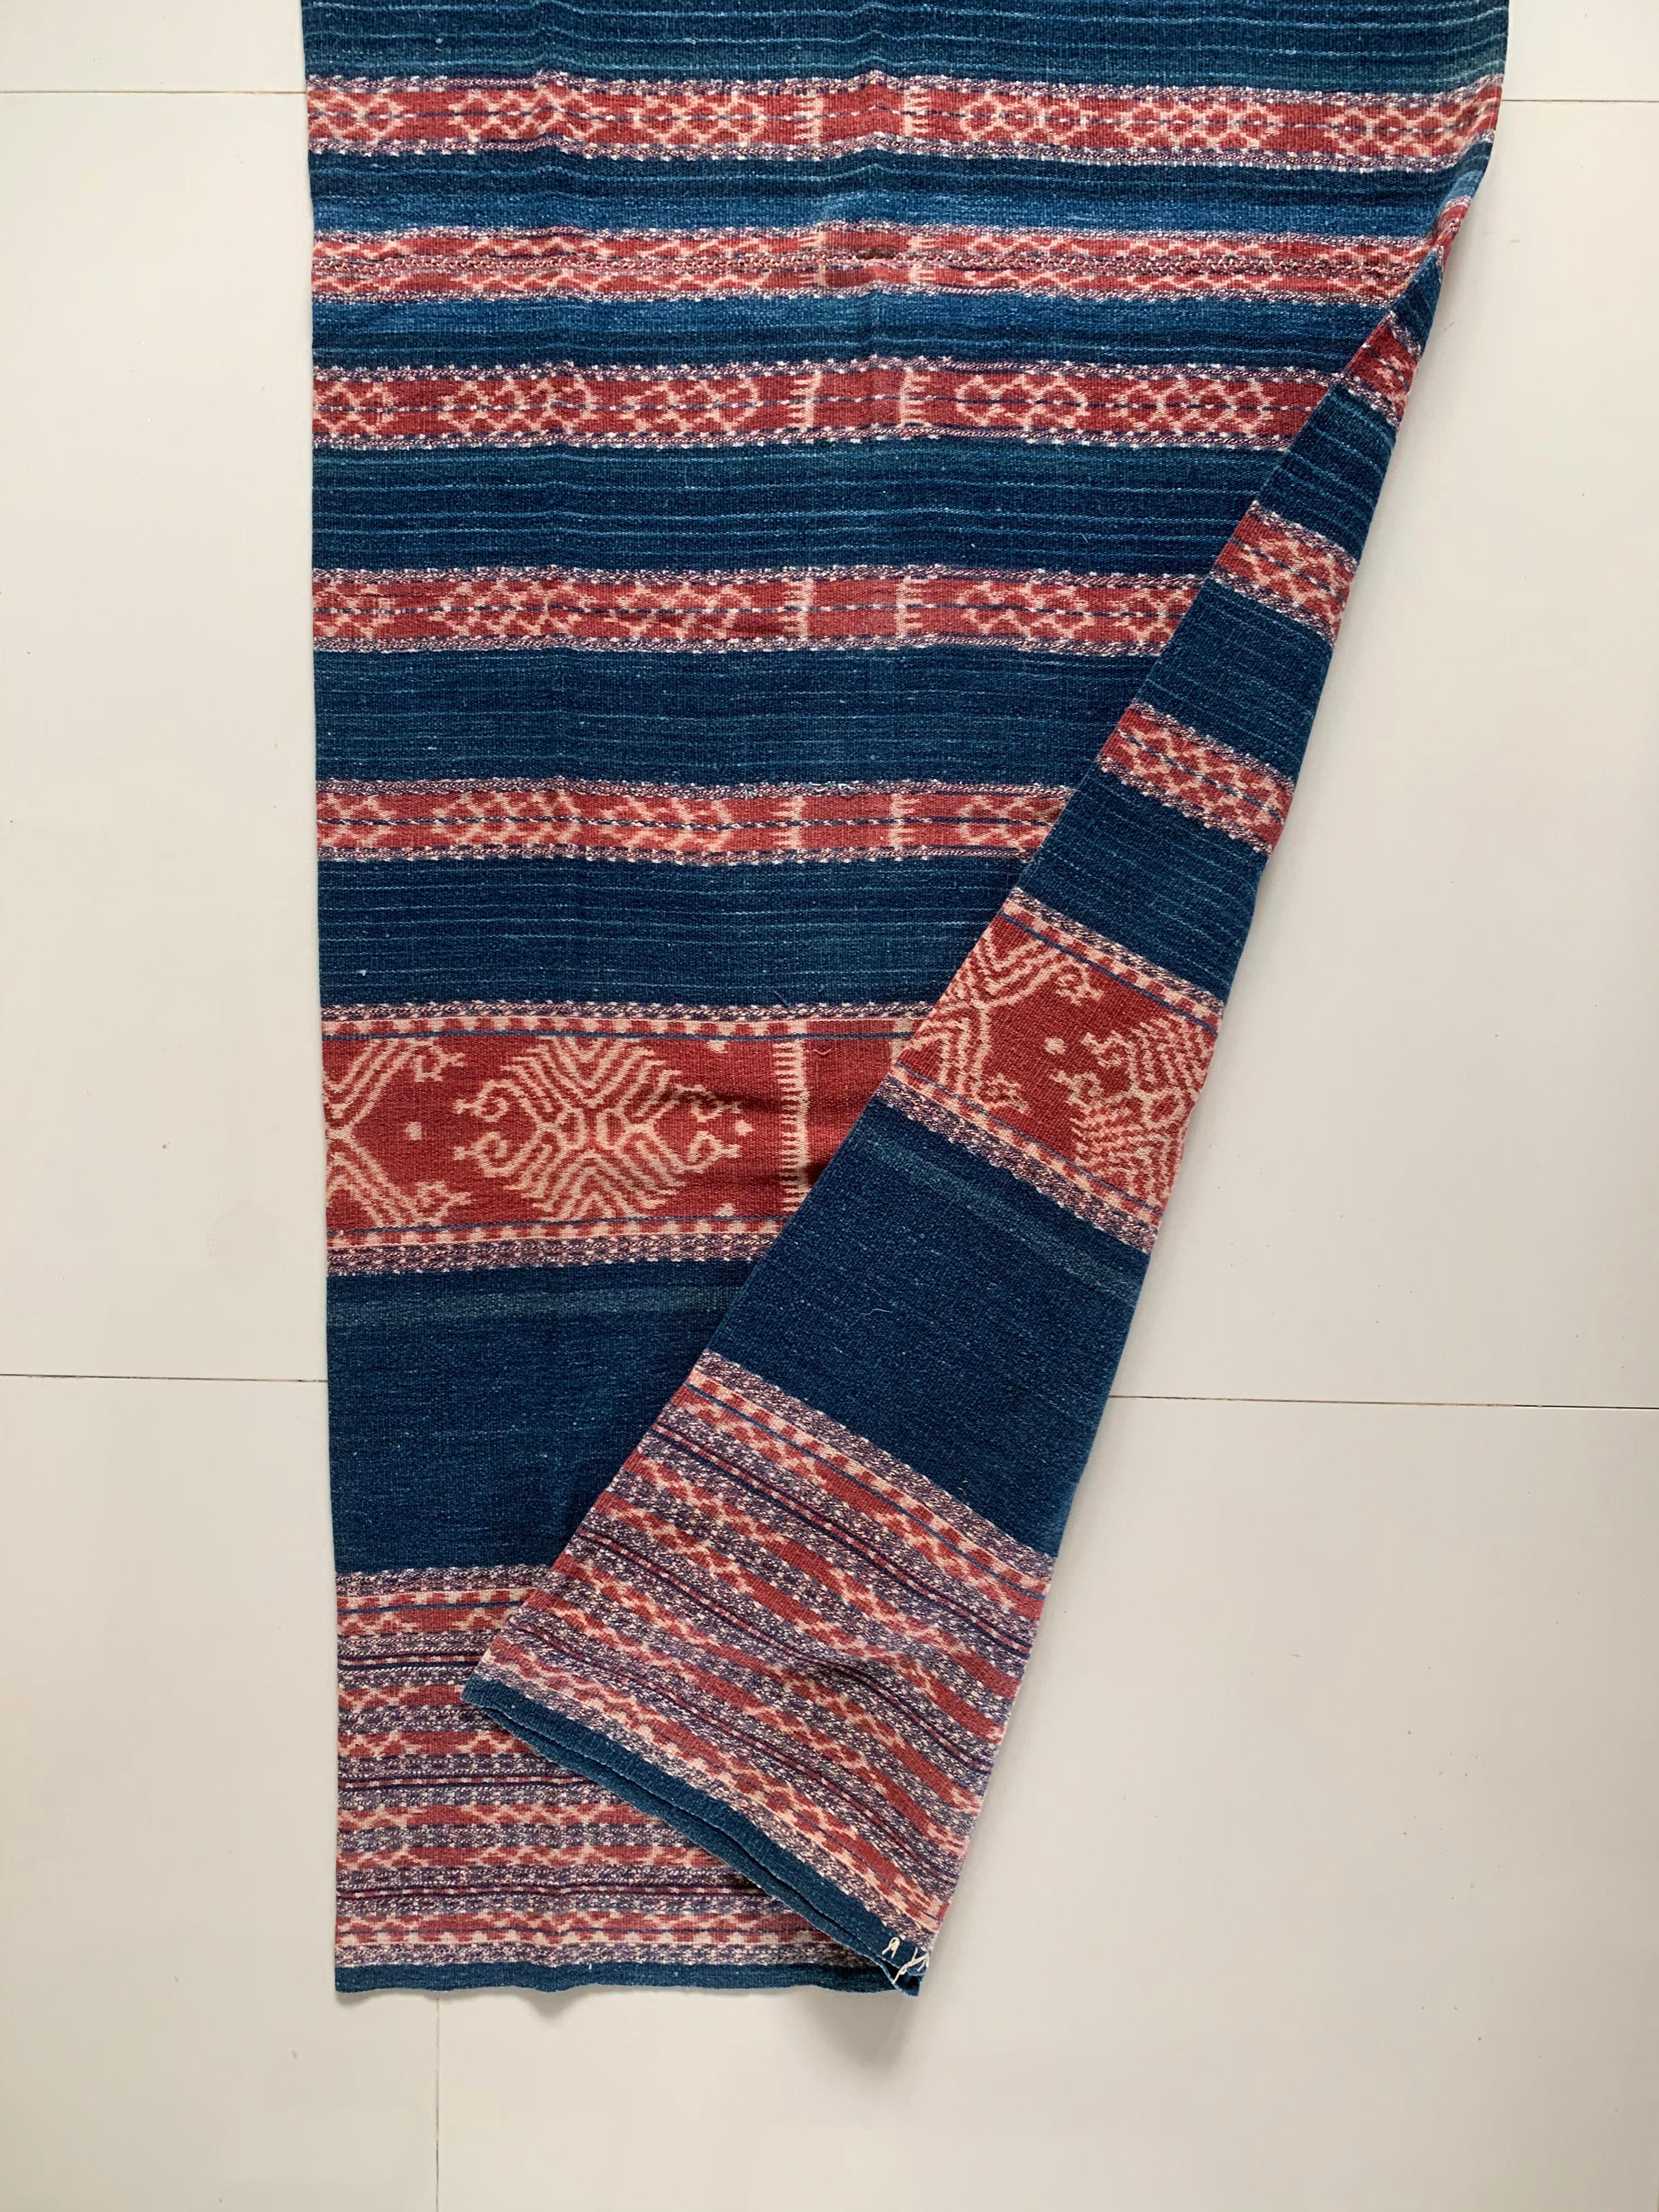 Ikat Textile from Timor with Naturally Coloured Dye & Tribal Motifs, Indonesia In Good Condition For Sale In Jimbaran, Bali